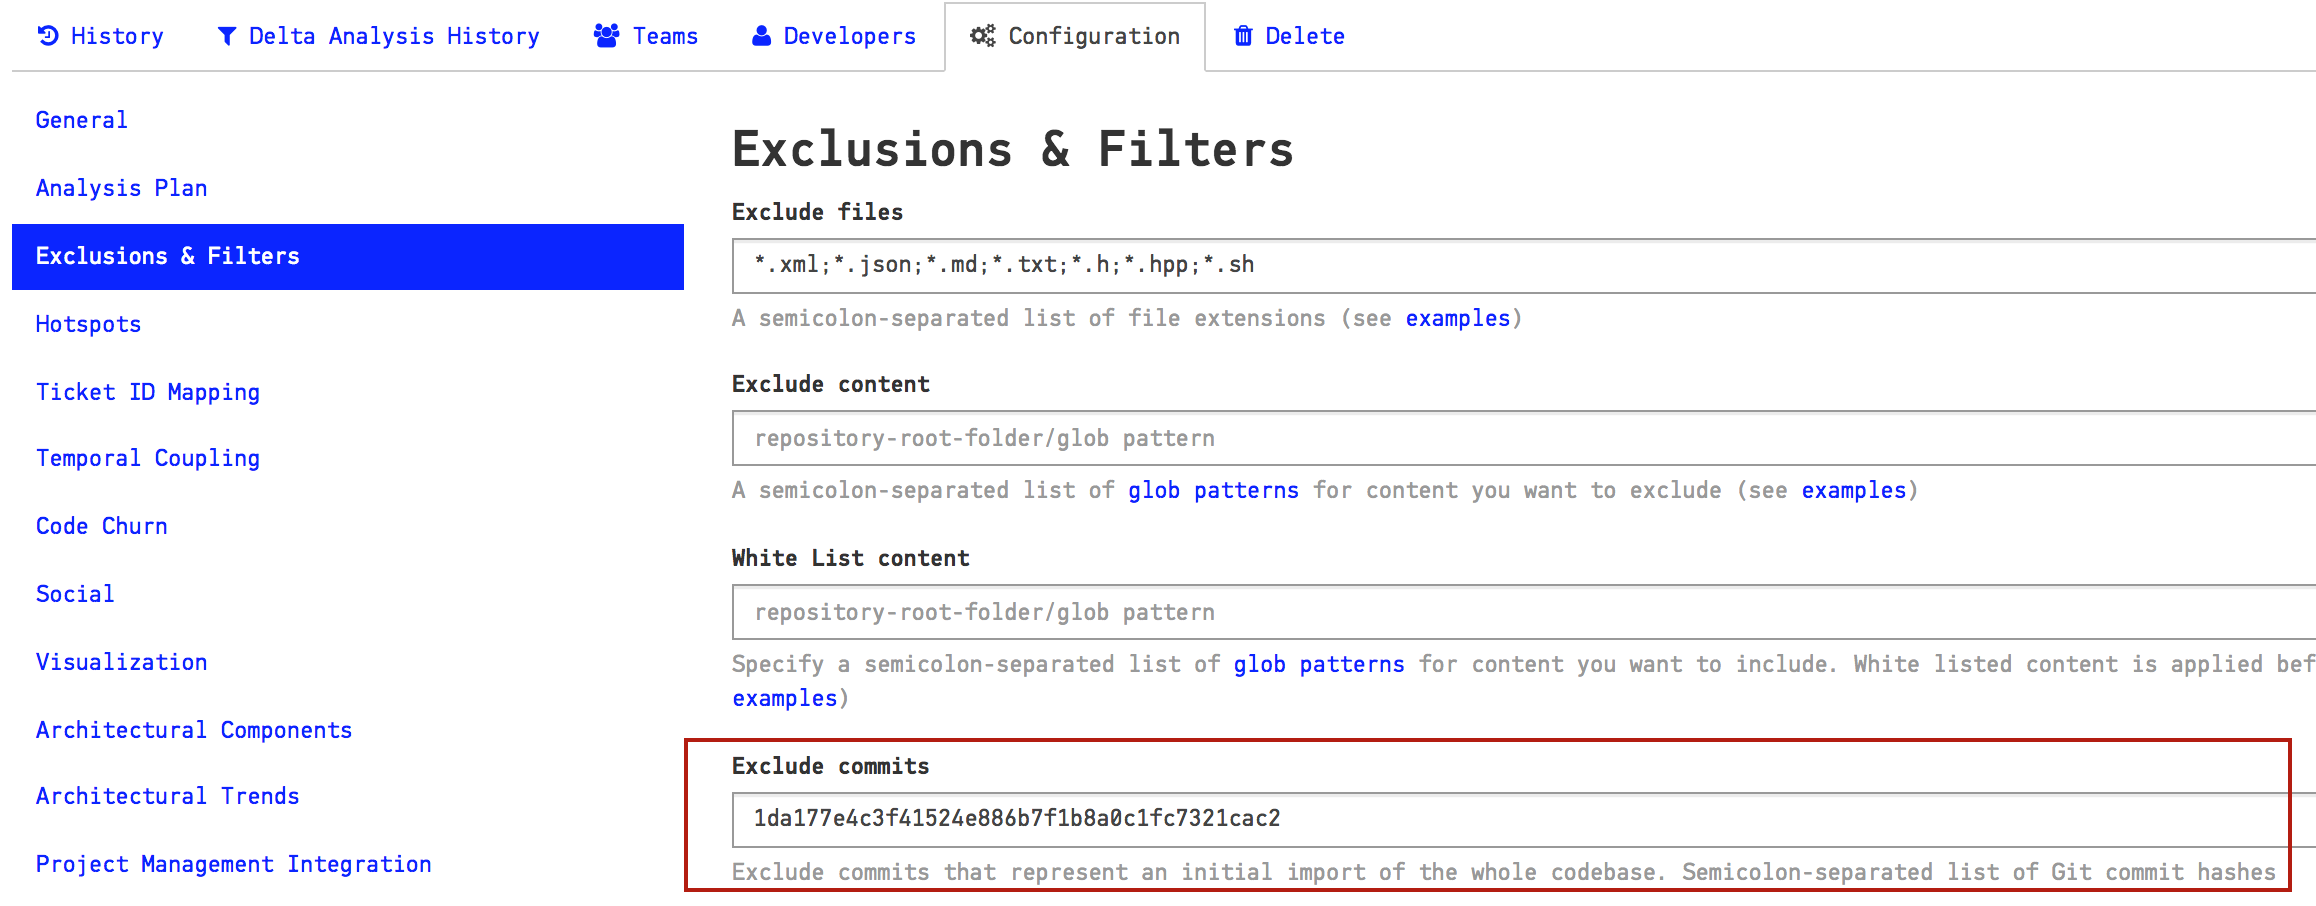 Exclude specific commits